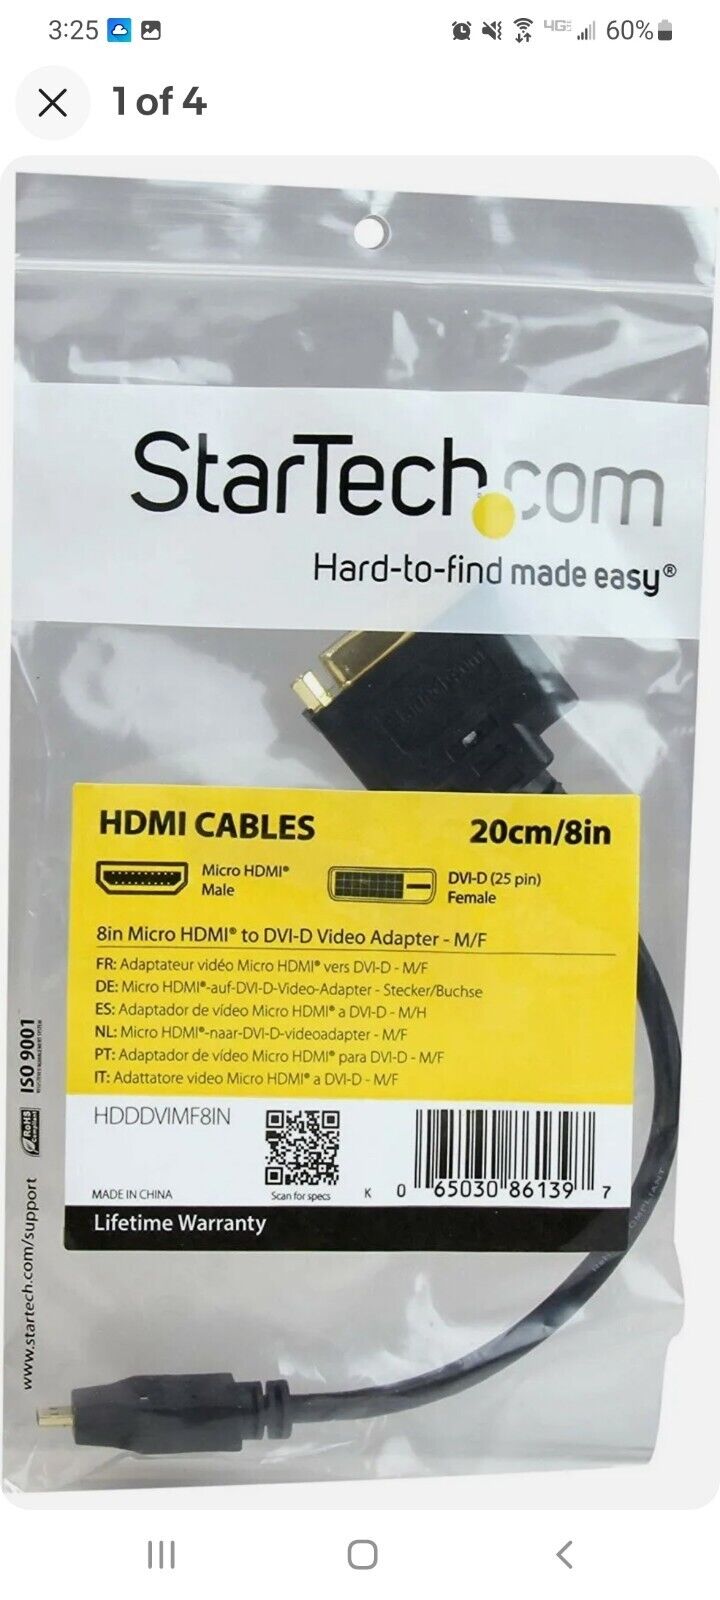 StarTech.com 8 in Micro HDMI to DVI-D Adapter M/F Cable HDDDVIMF8IN